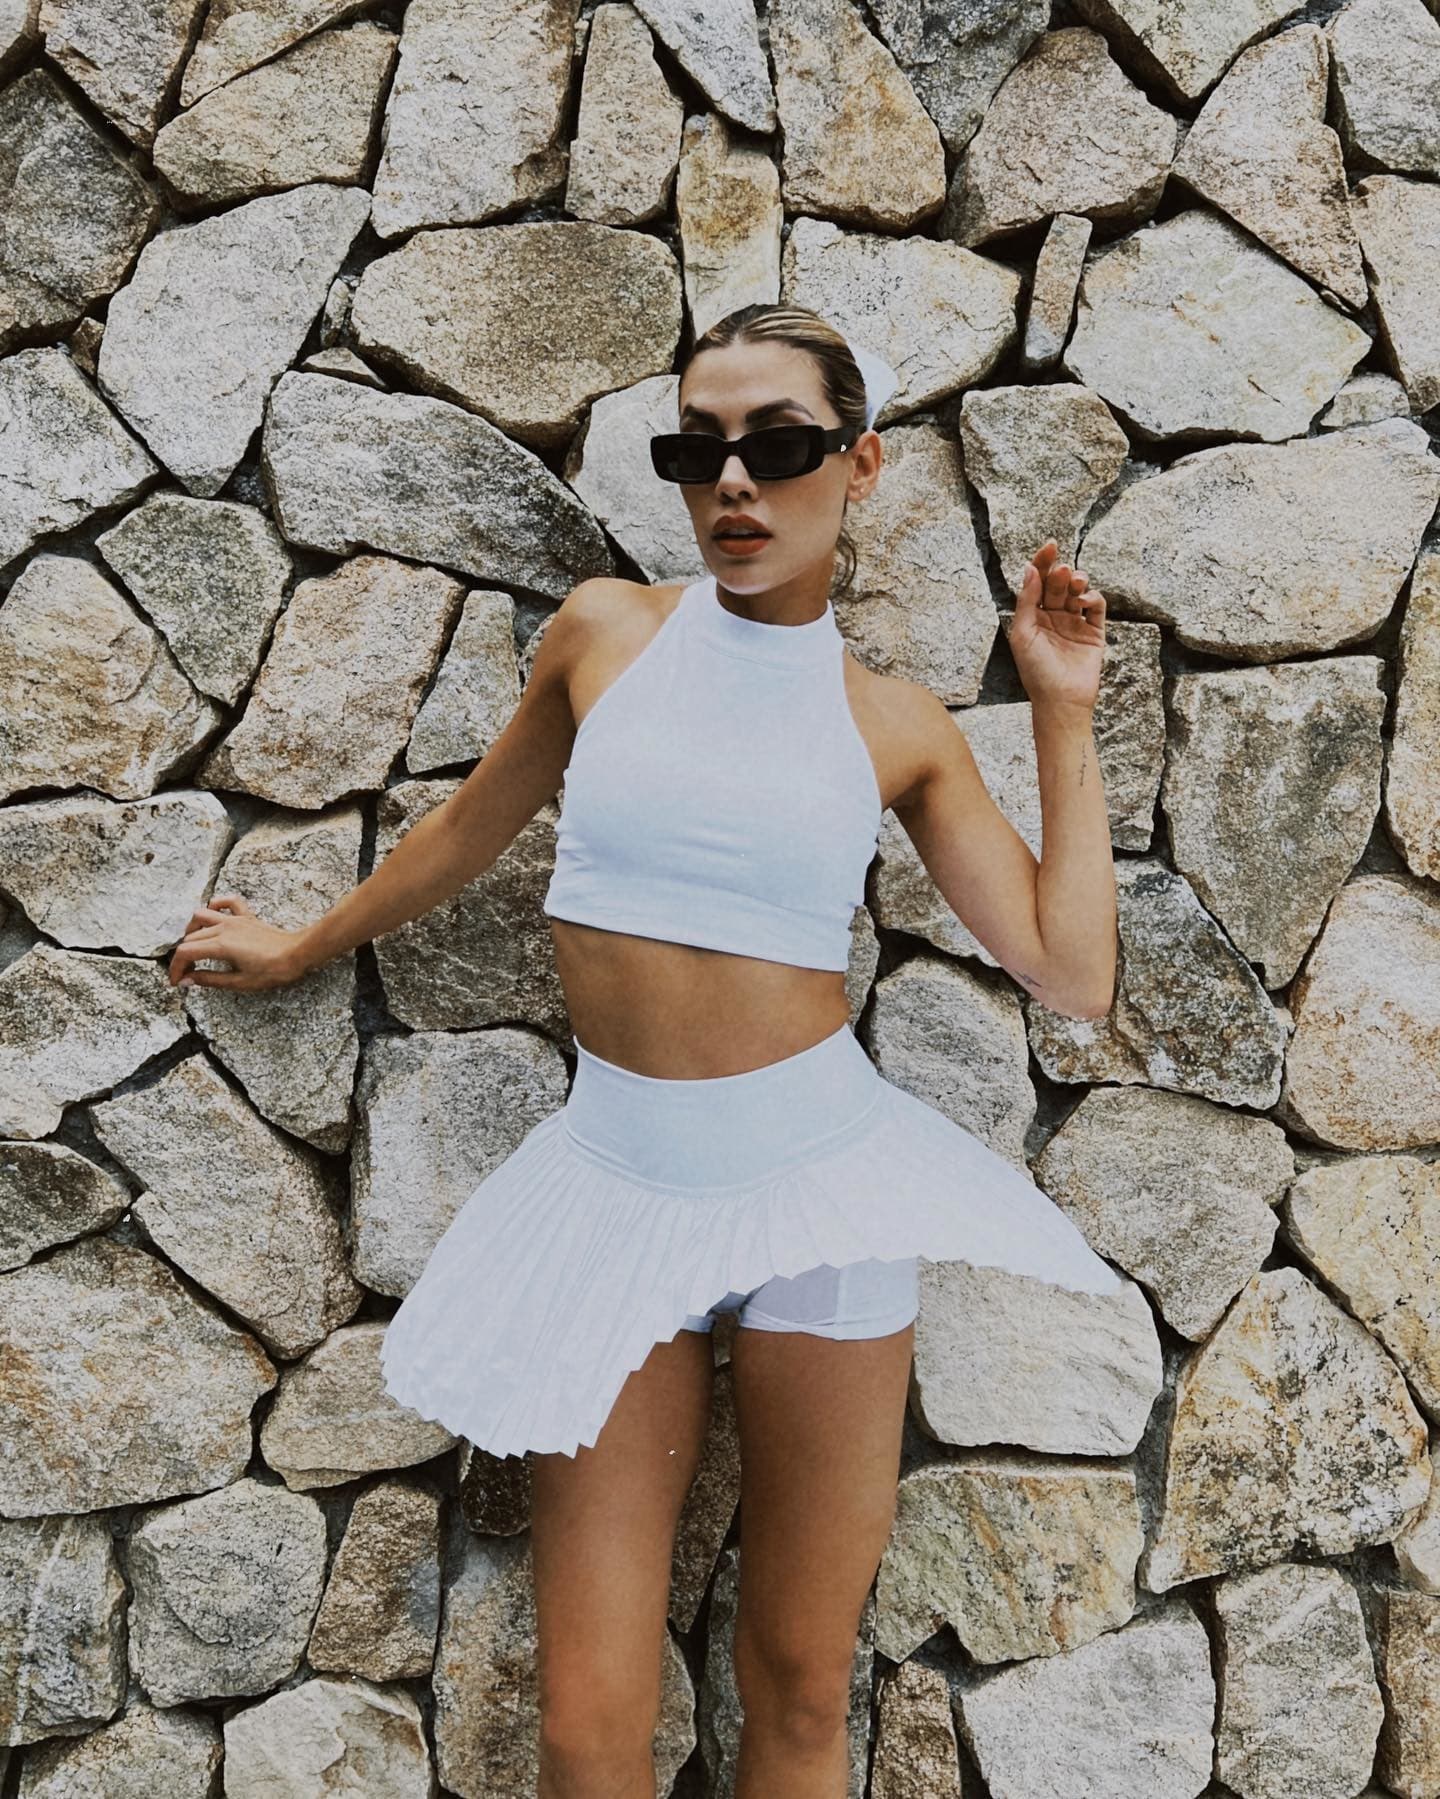 @michellesalasb wearing a white high neck cropped bra tank with a white pleated tennis skirt while posing in front of a rock wall.  